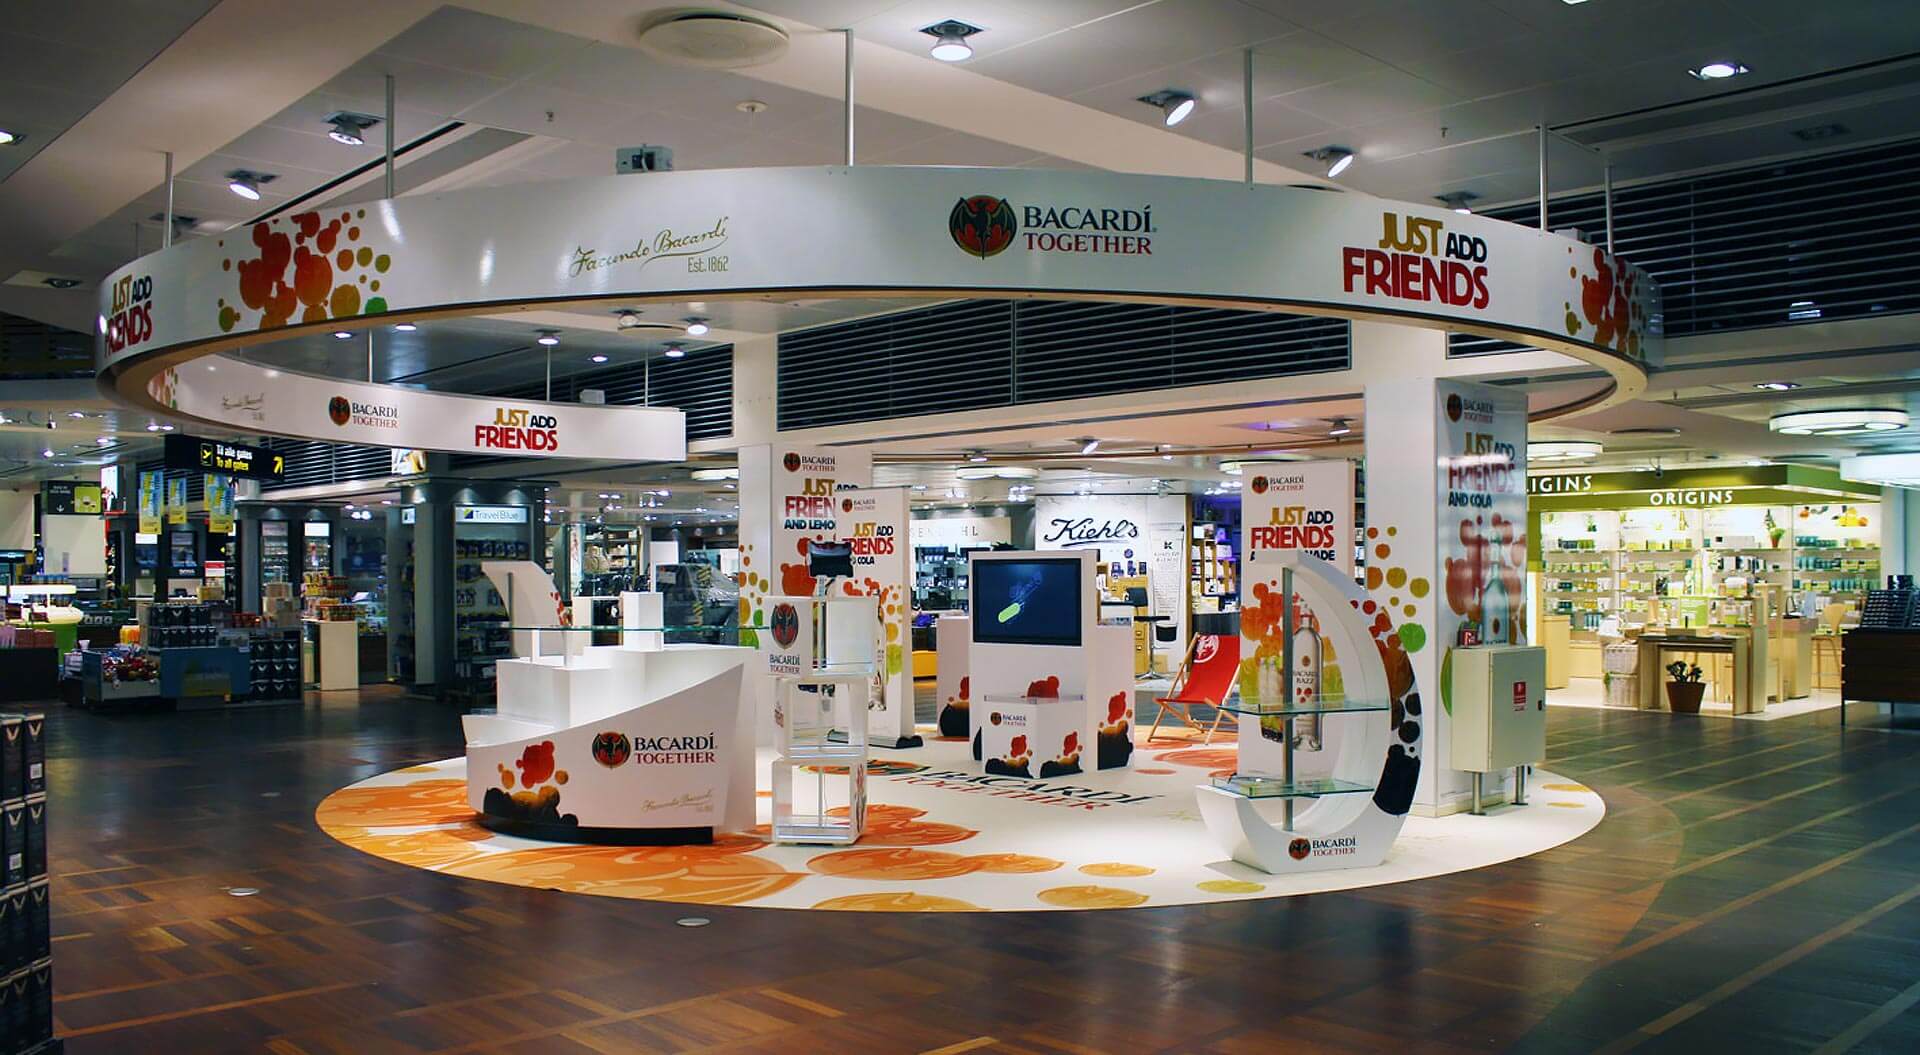 Bacardi Together brand identity duty free promotion campaigns for travel retail airport design